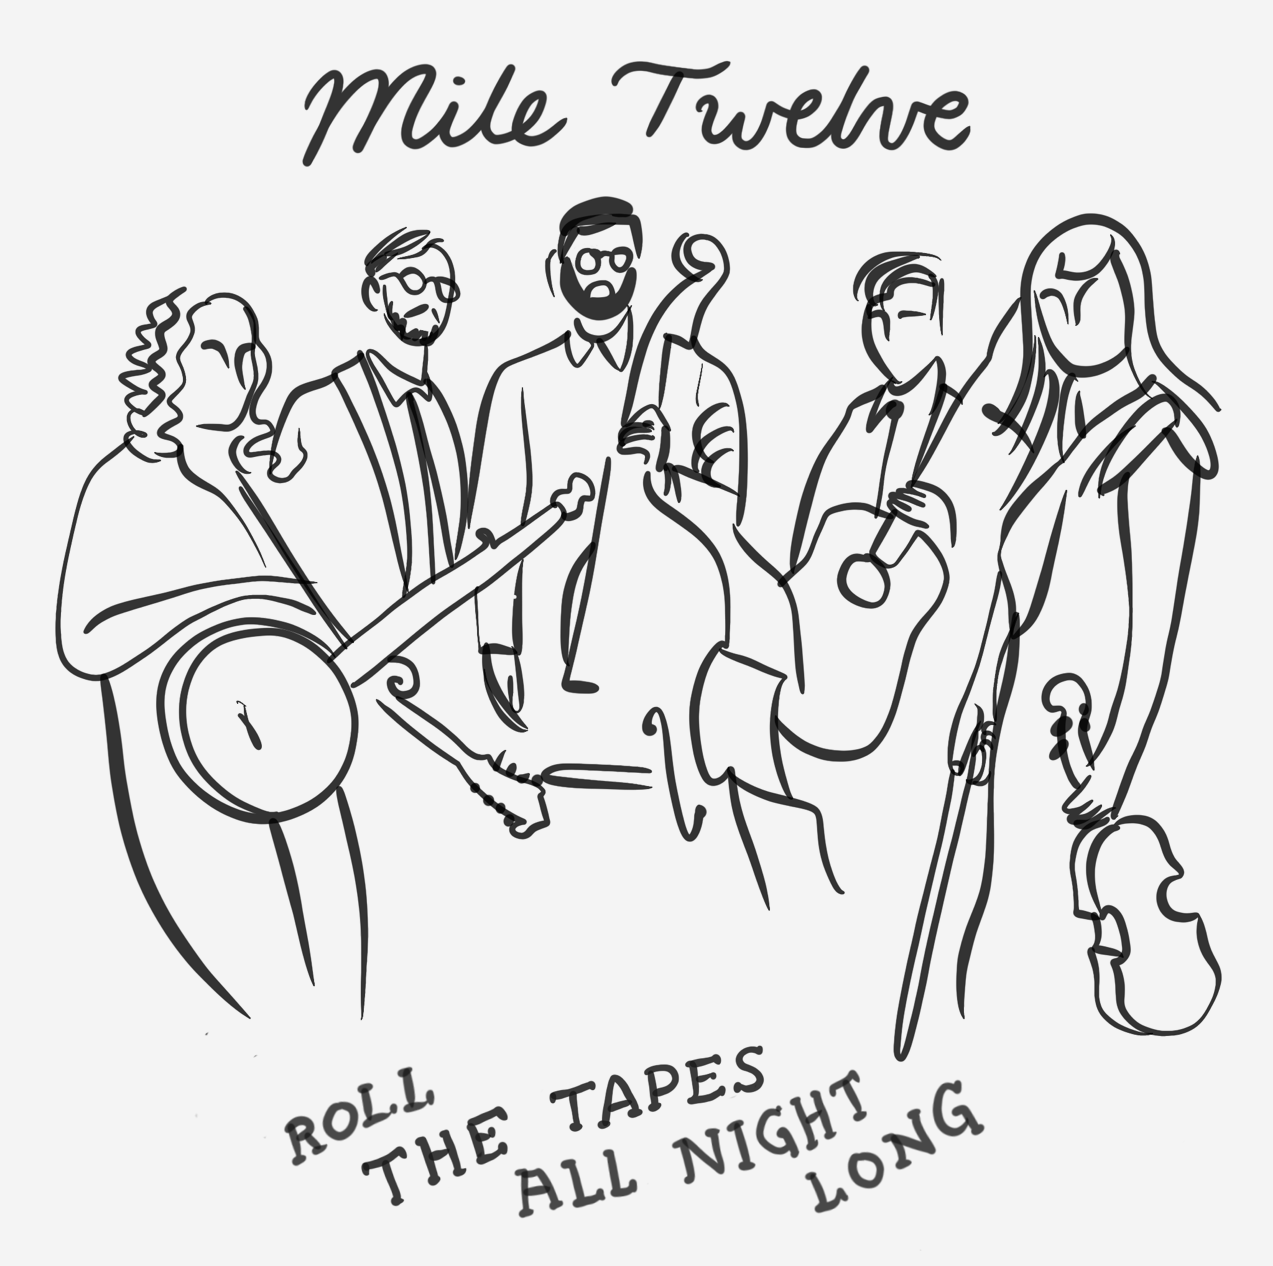 Roll the Tapes All Night Long | Mile Twelve